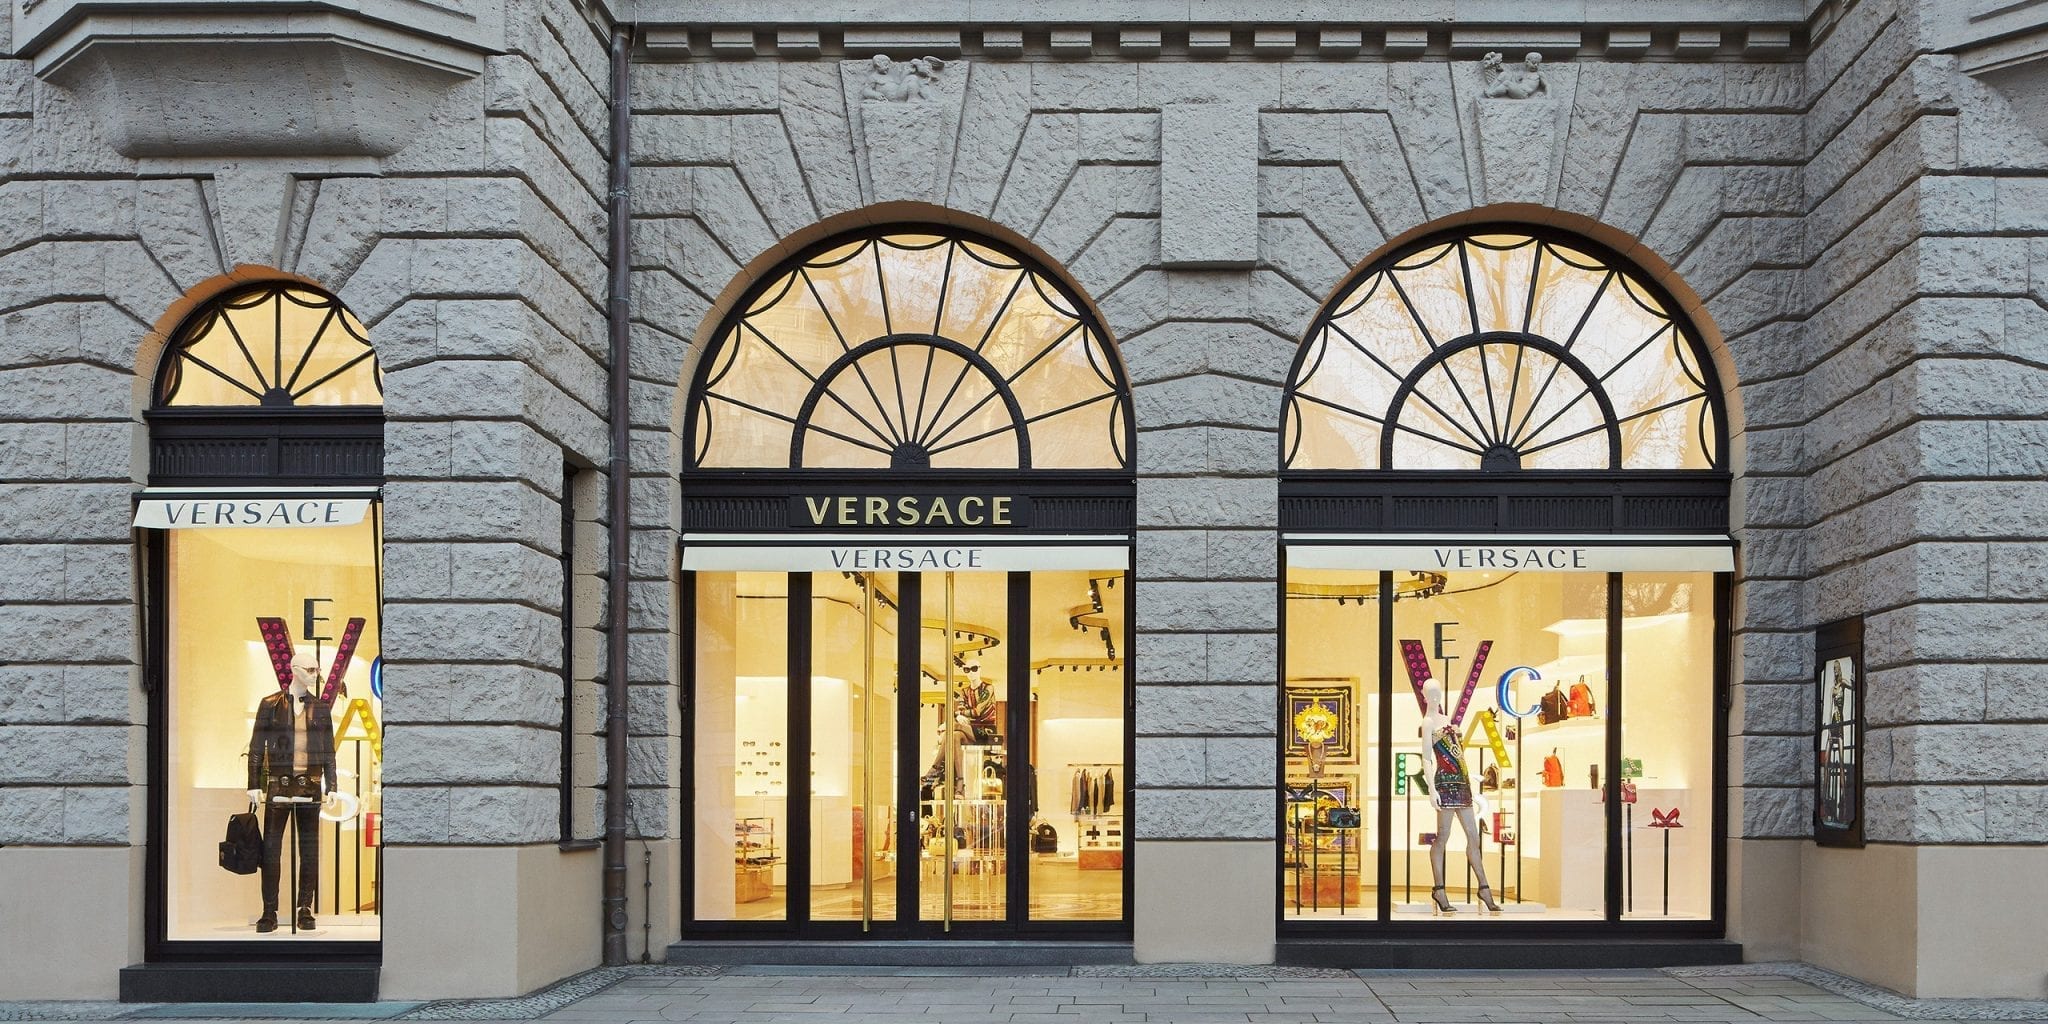 Versace is the latest luxury brand to increase prices